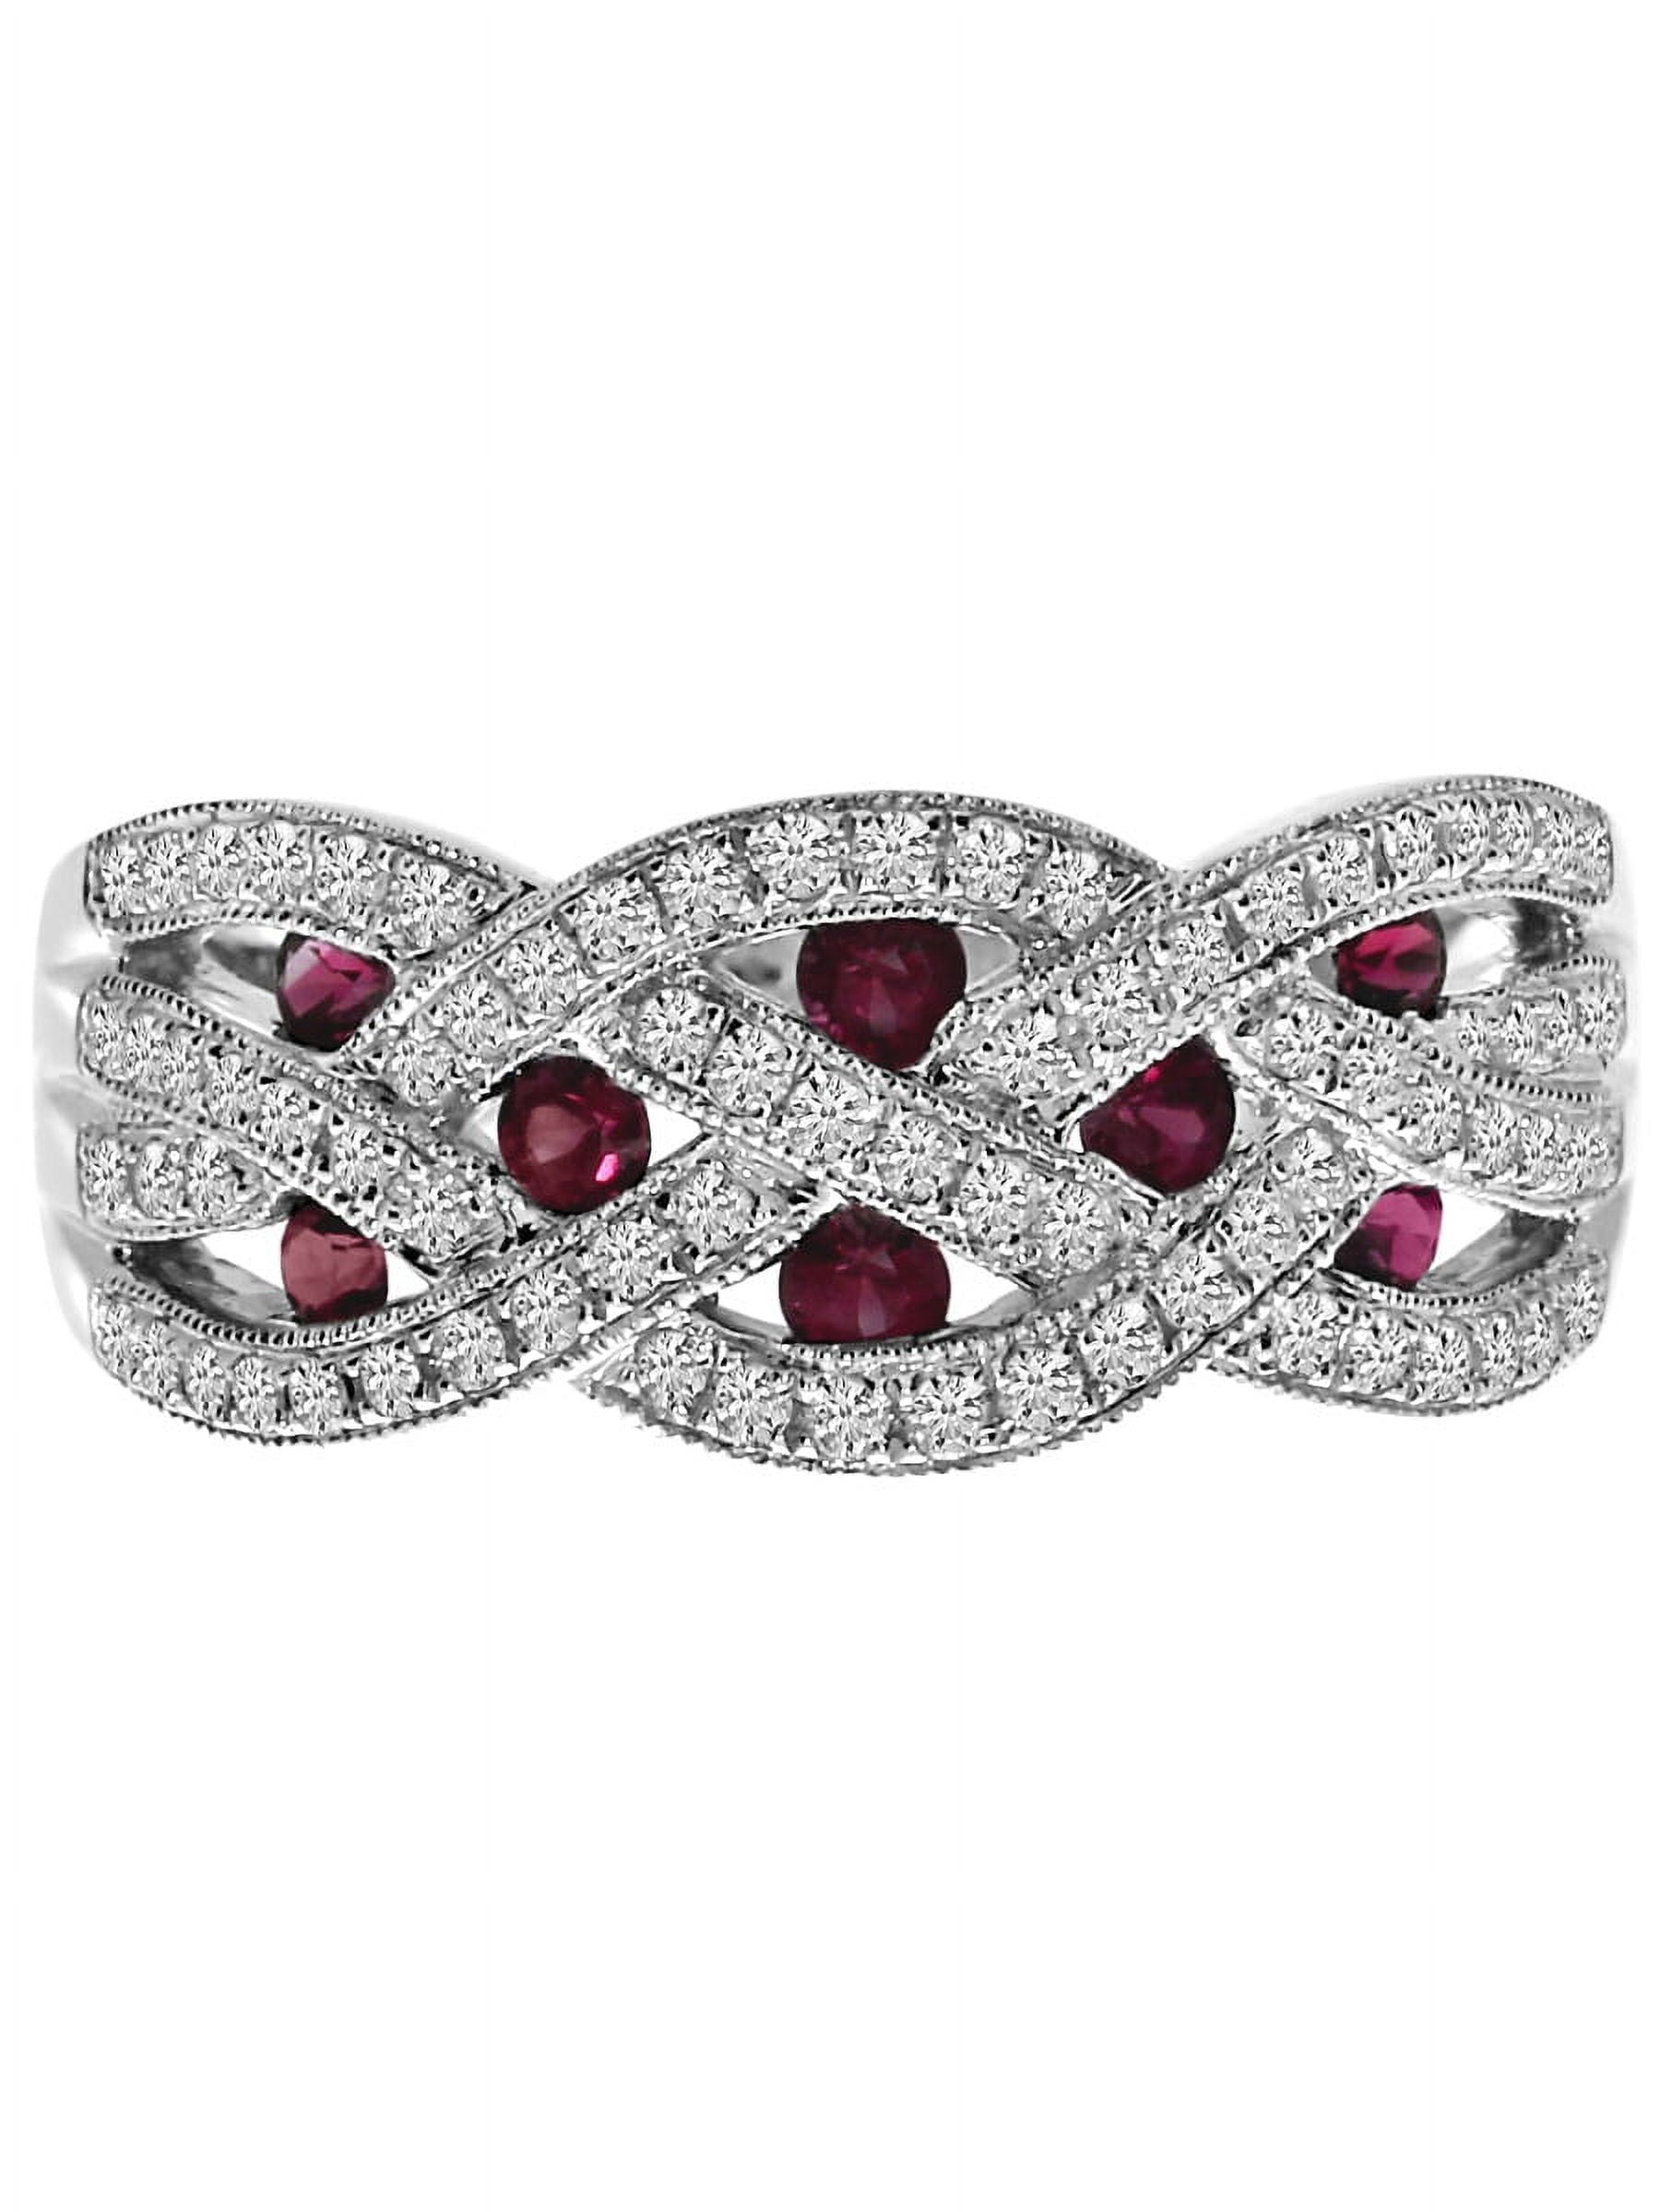 14k White Gold Ruby and Diamond Braided Wide Band 